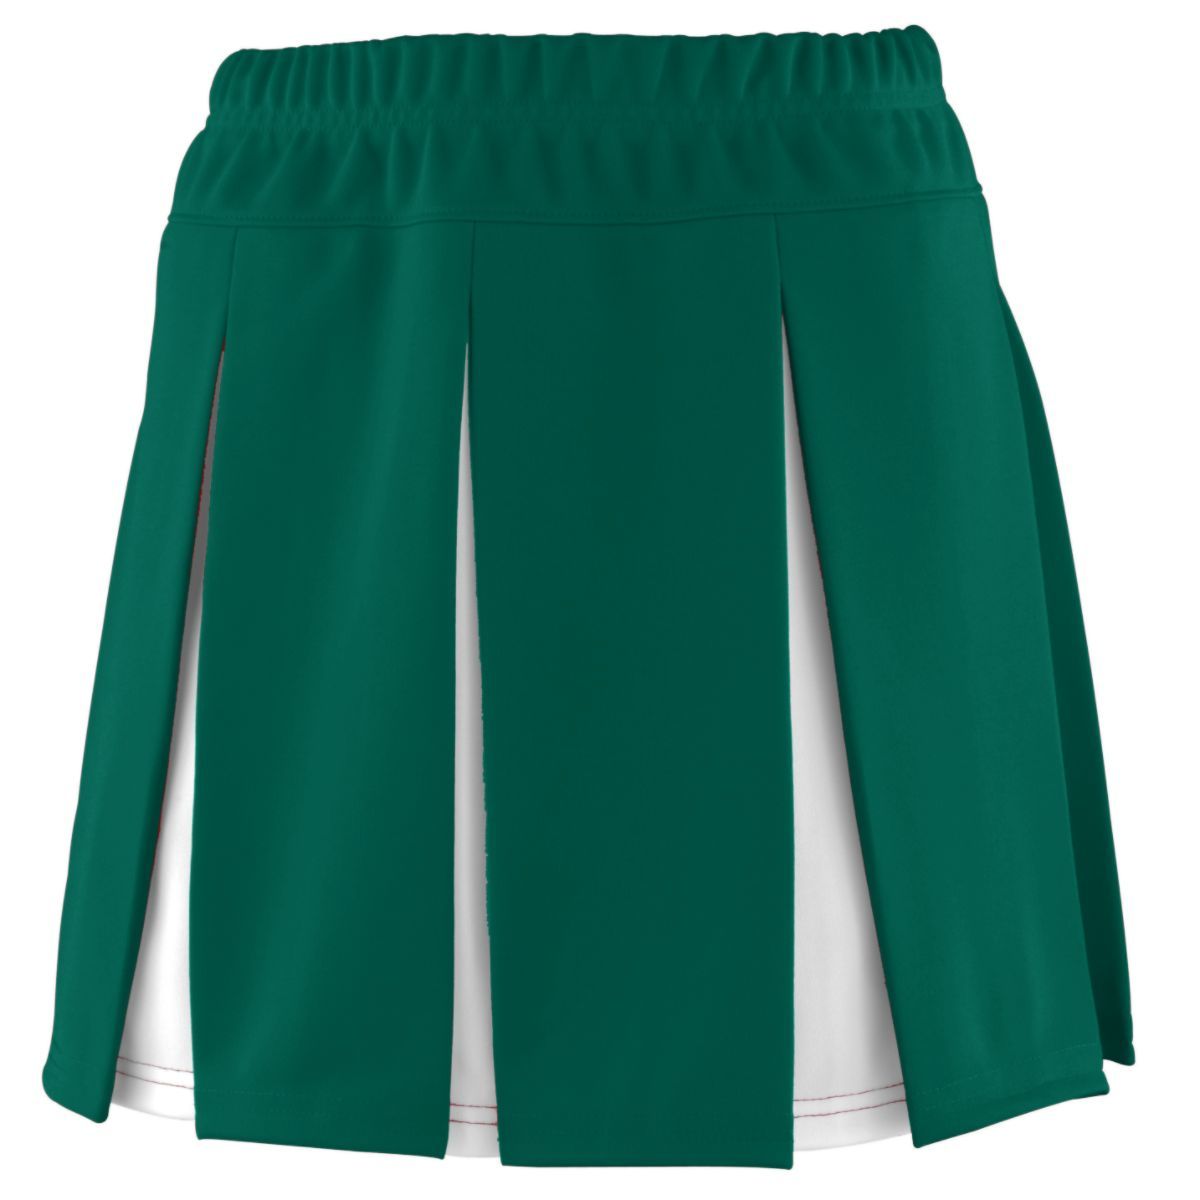 Augusta Sportswear Girls Liberty Skirt in Dark Green/White  -Part of the Girls, Augusta-Products, Cheer product lines at KanaleyCreations.com